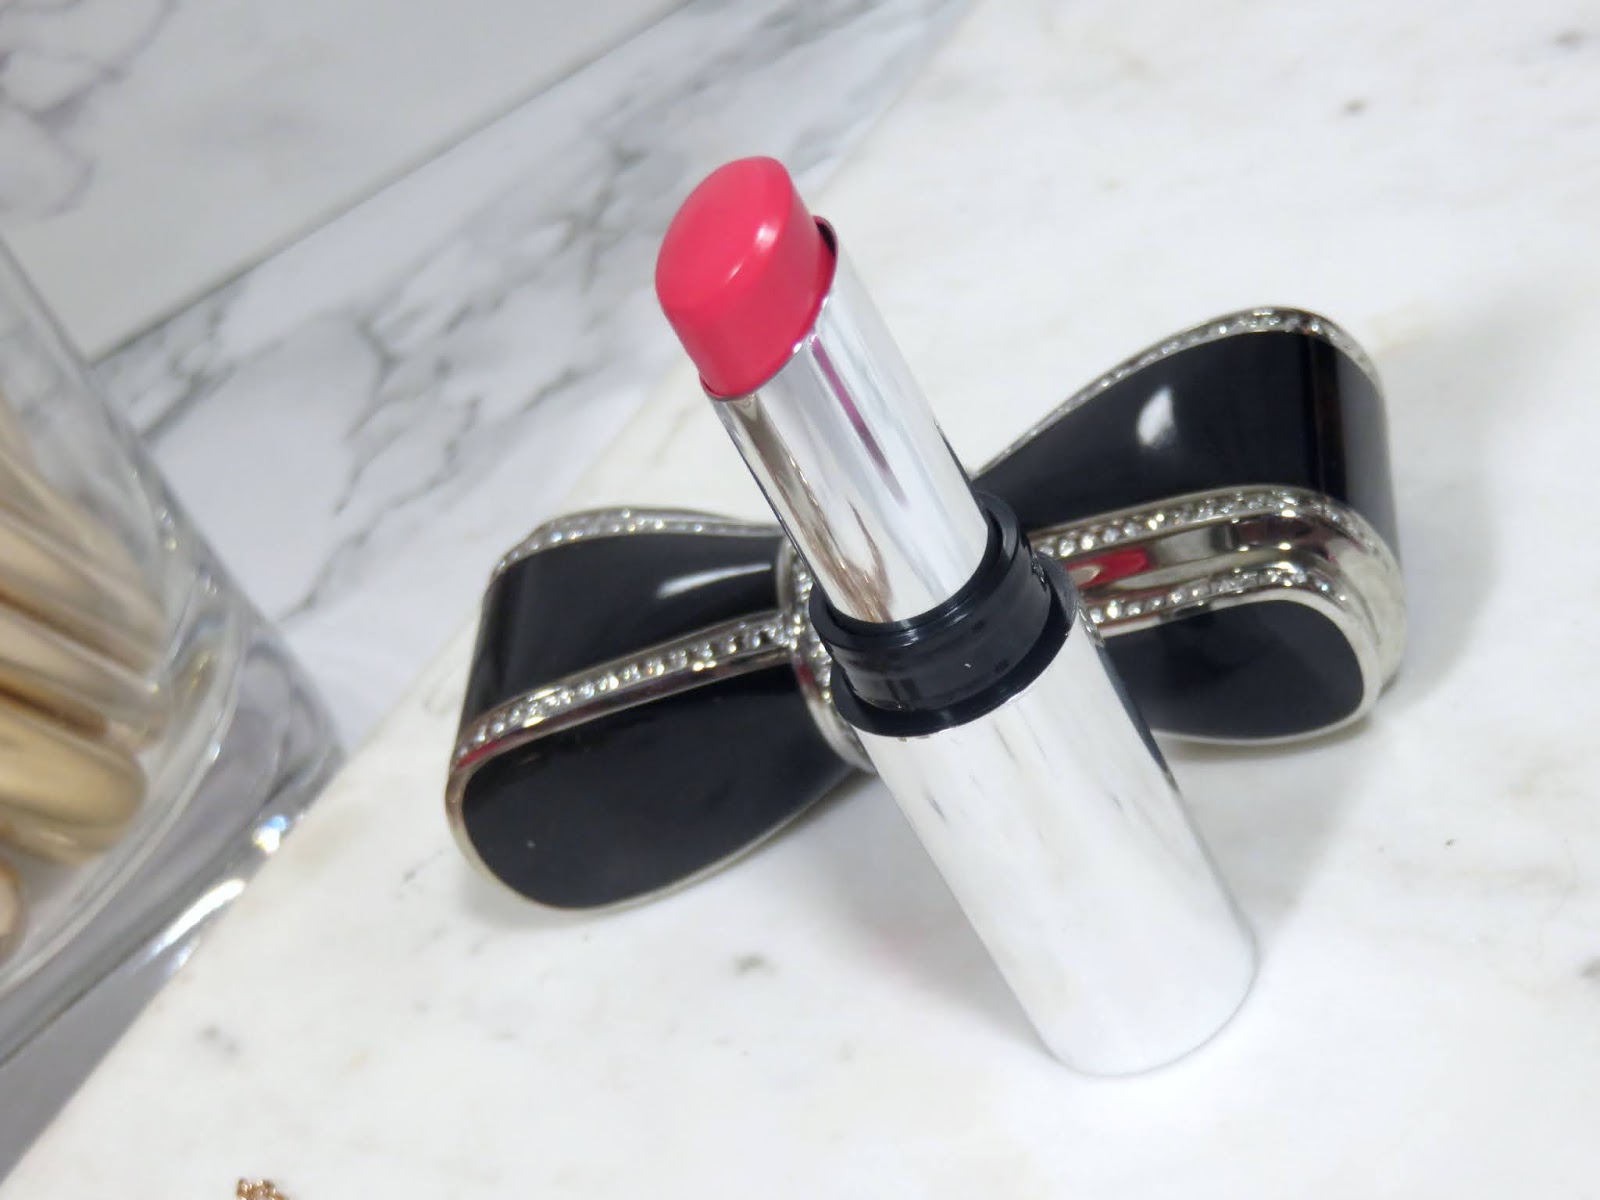 House of Sillage Diamond Powder Satin Lipstick Cruise Collection Review and Swatches